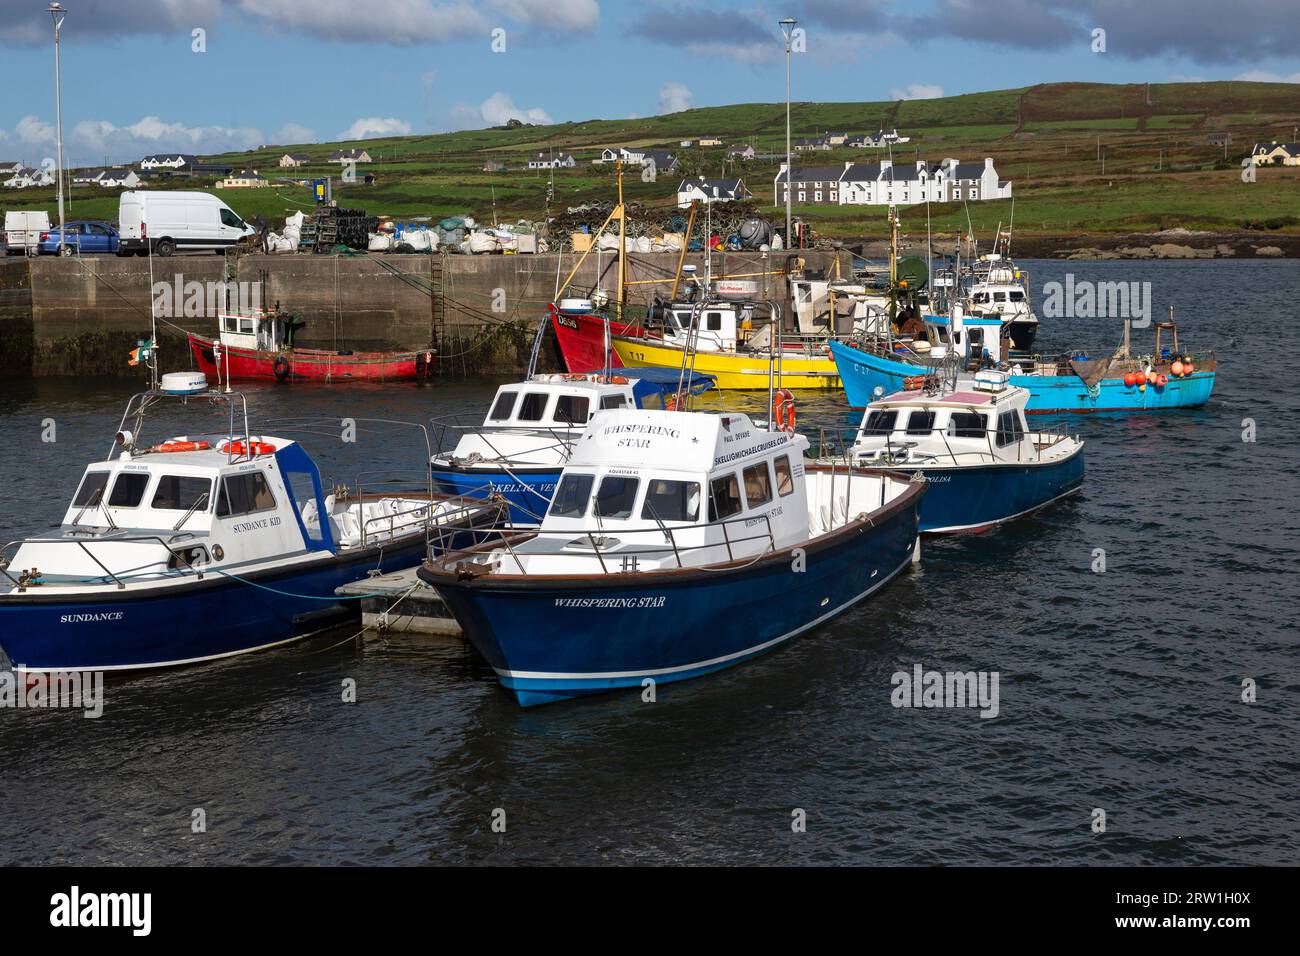 Skellig Michael Tourist boats moored at Portmagee, County Kerry, Ireland Stock Photo